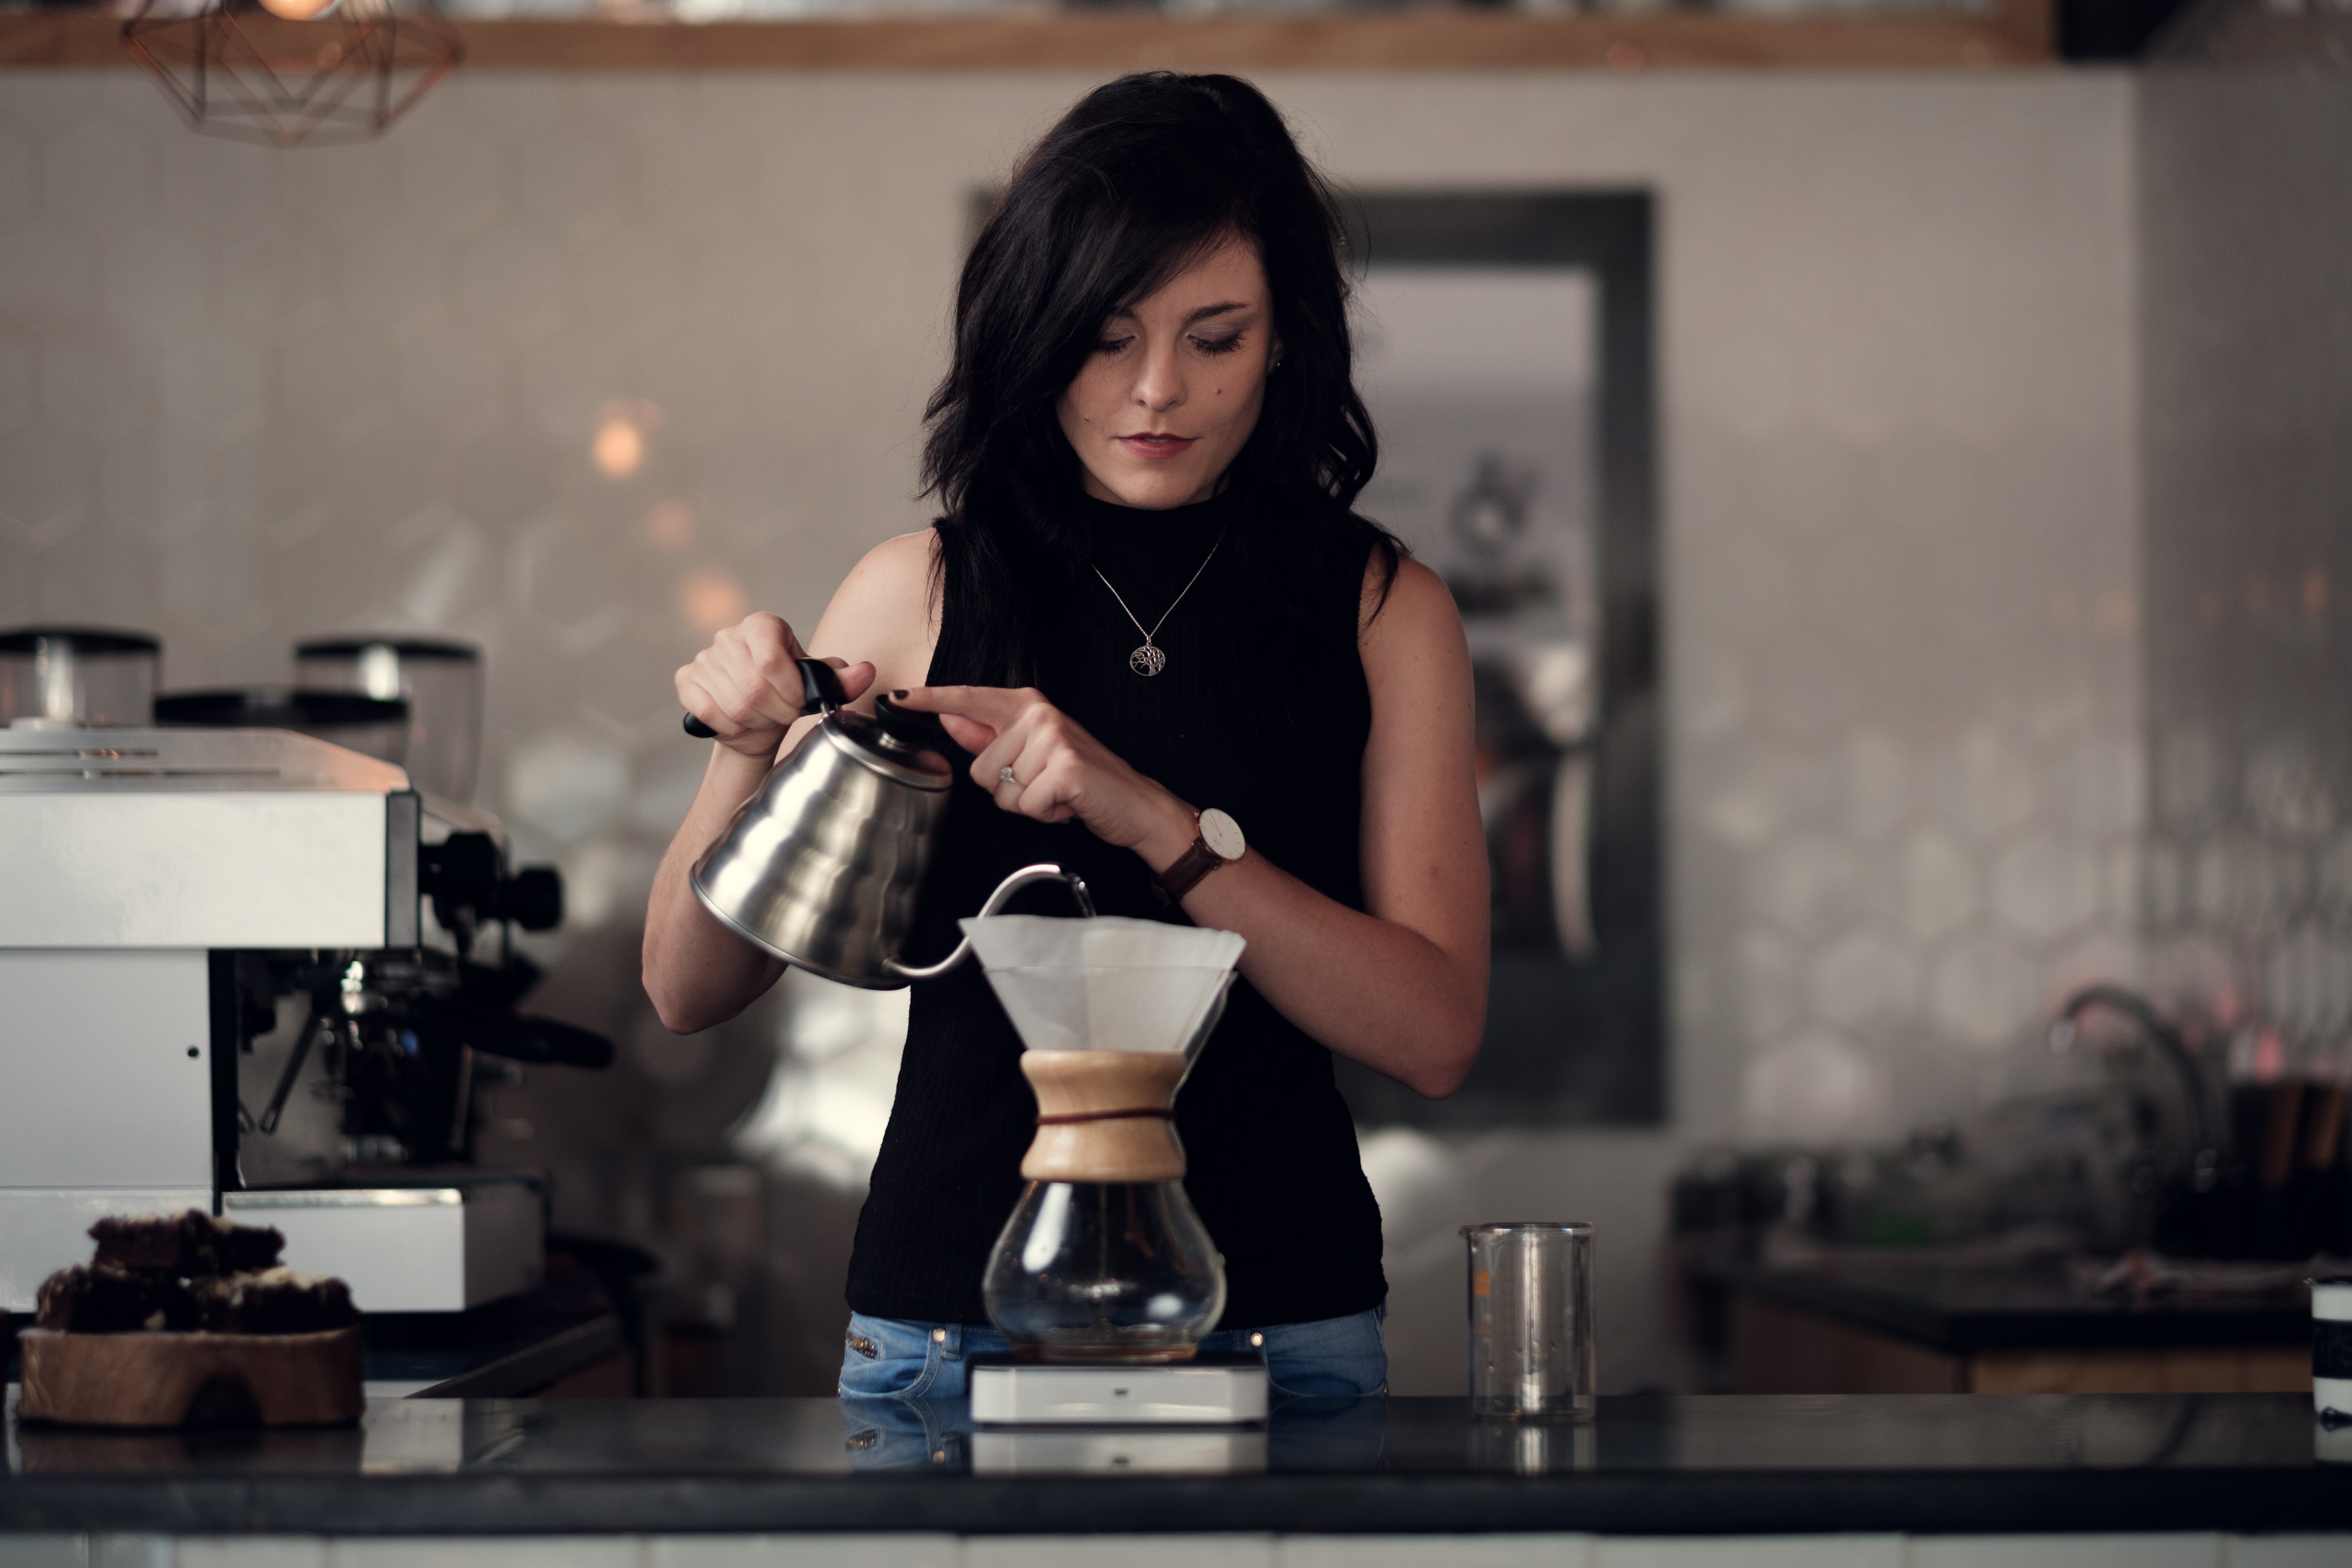 Meet rich girl coffee pictures